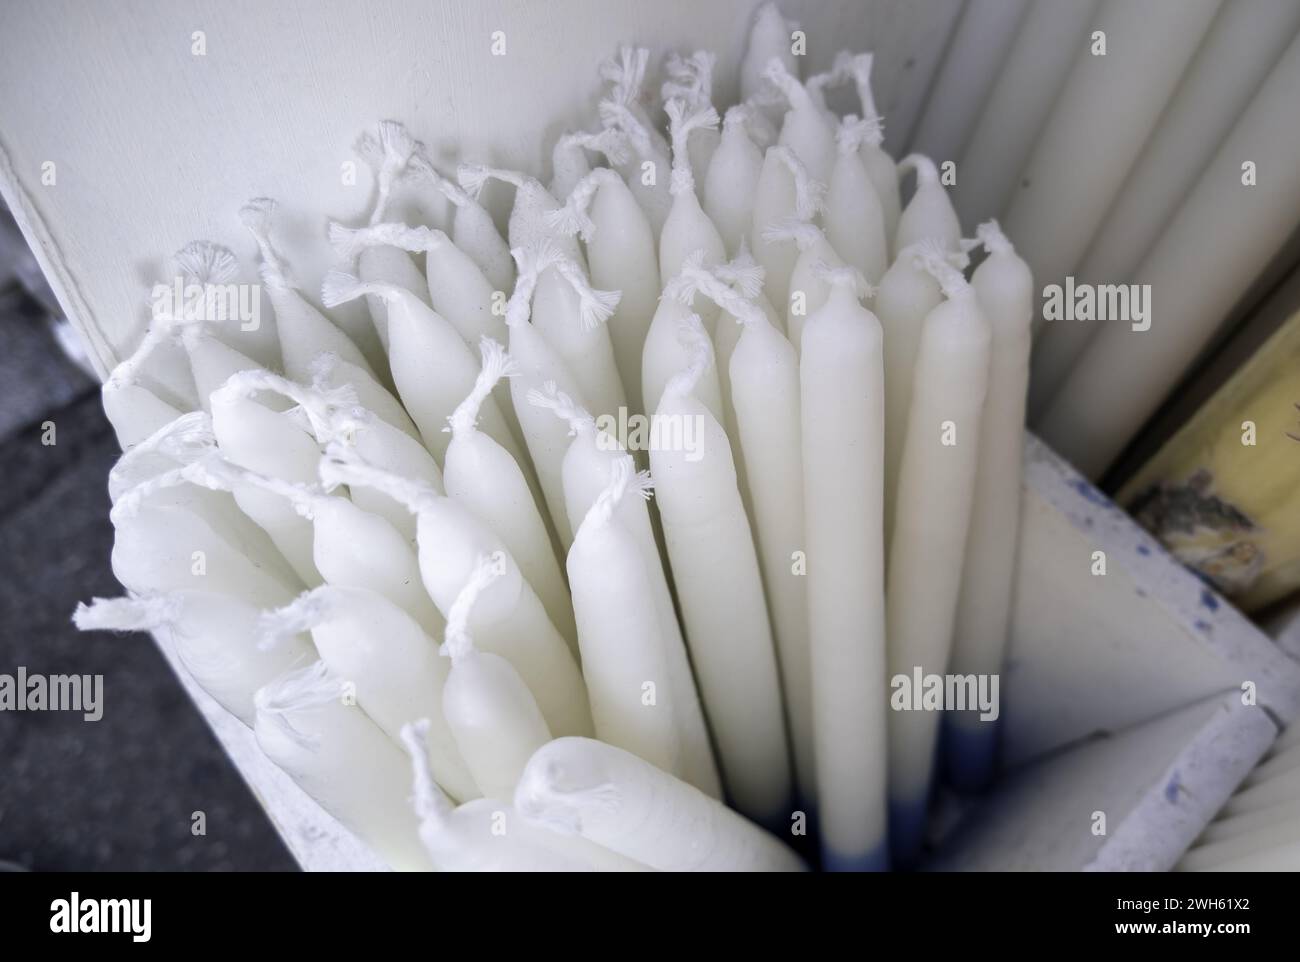 Detail of unlit white wax candle, tradition and faith Stock Photo